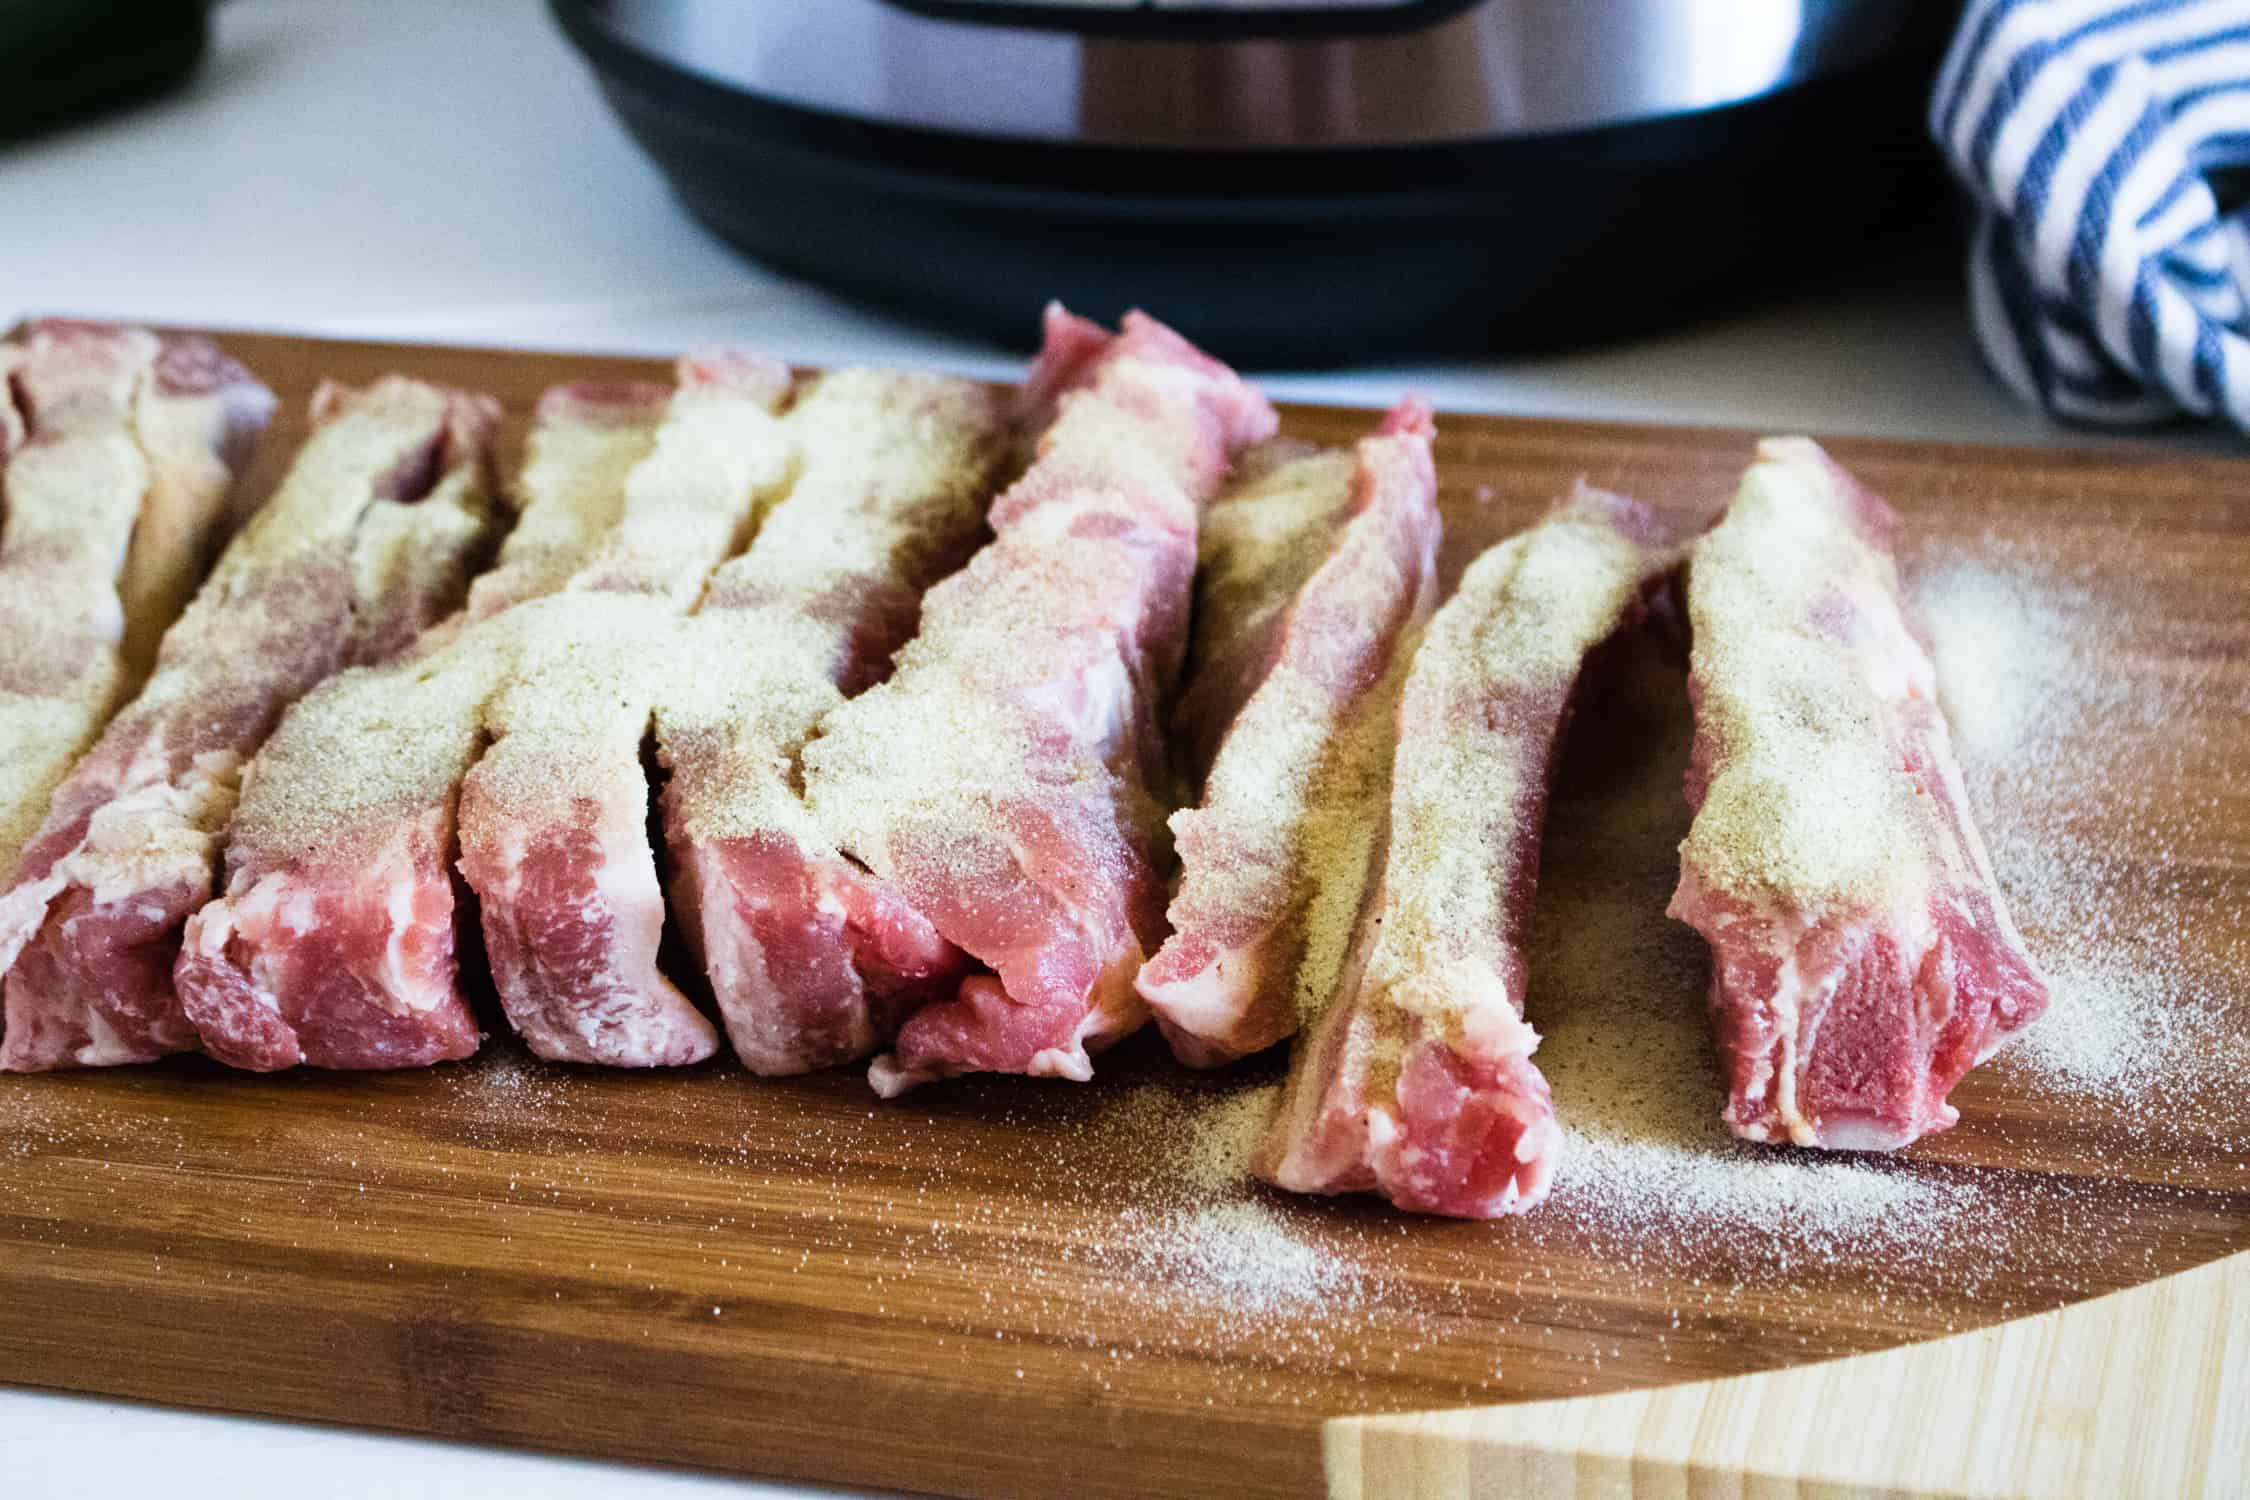 raw ribs for instant pot rib tips on wooden cutting board with seasoning on them